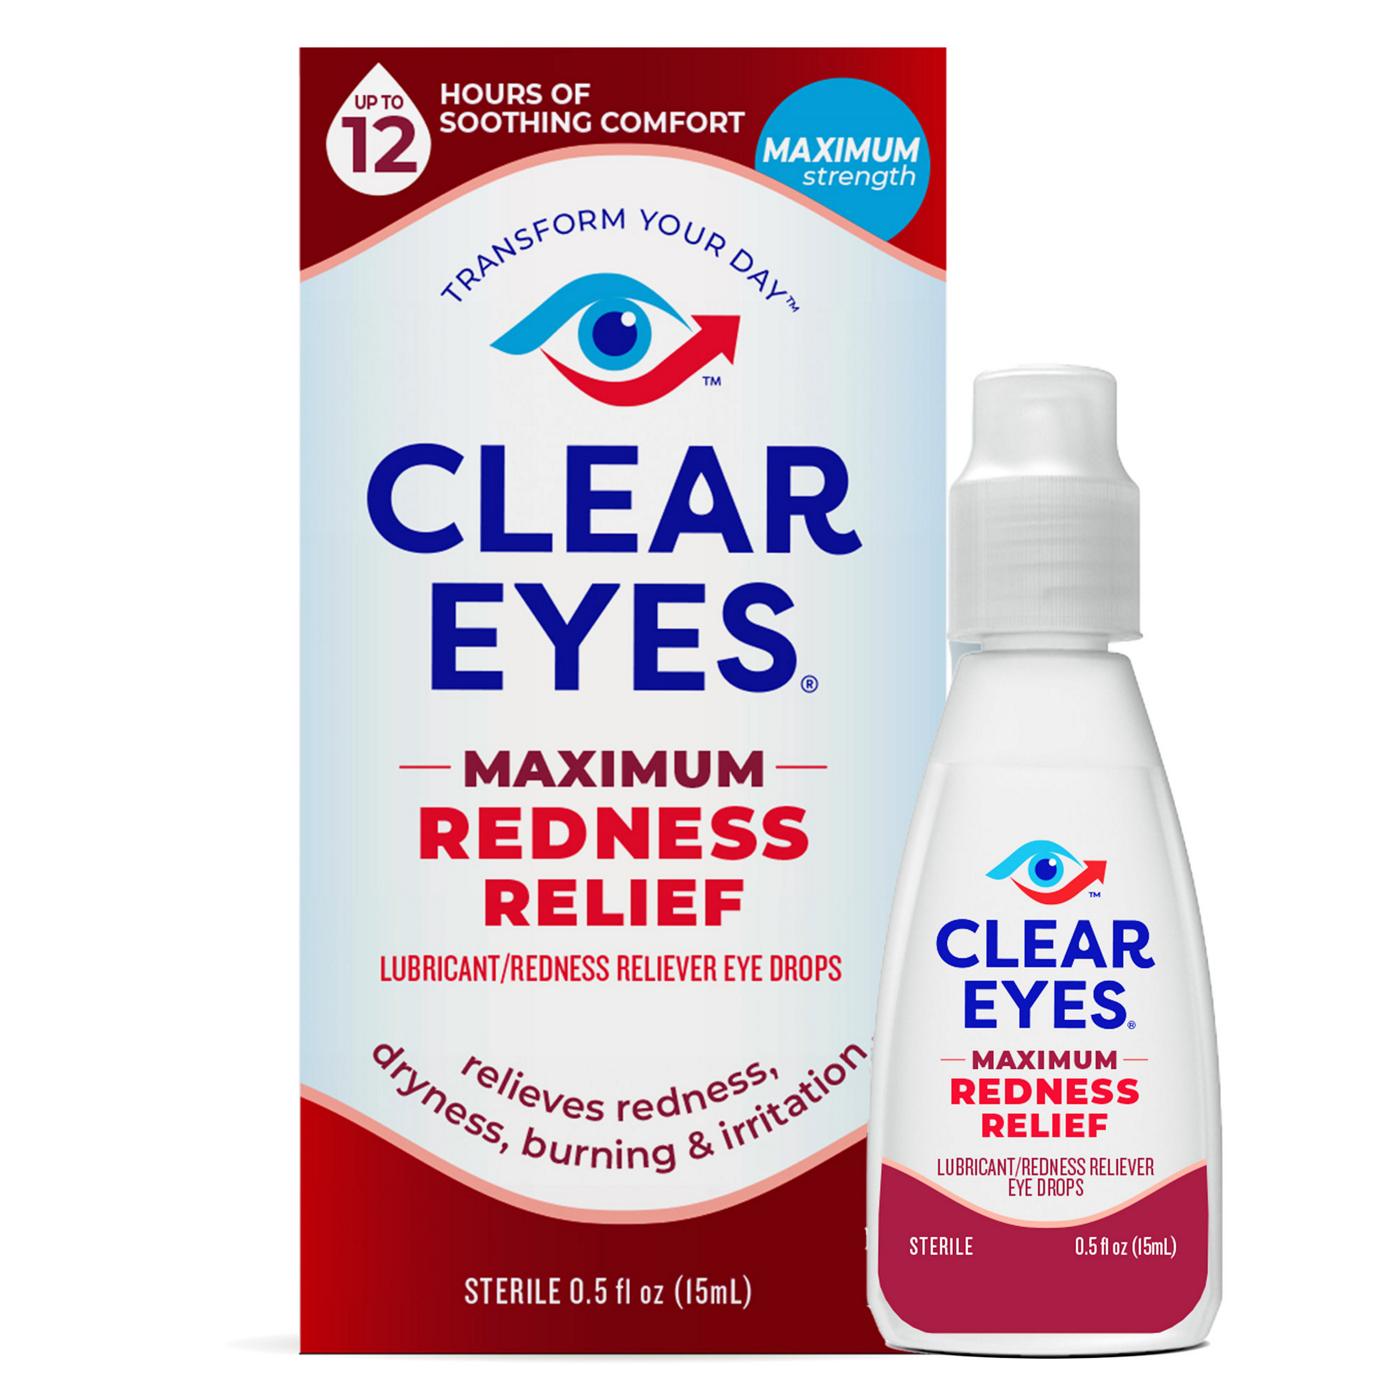 Clear Eyes Max Redness Relief Eye Drops; image 2 of 5